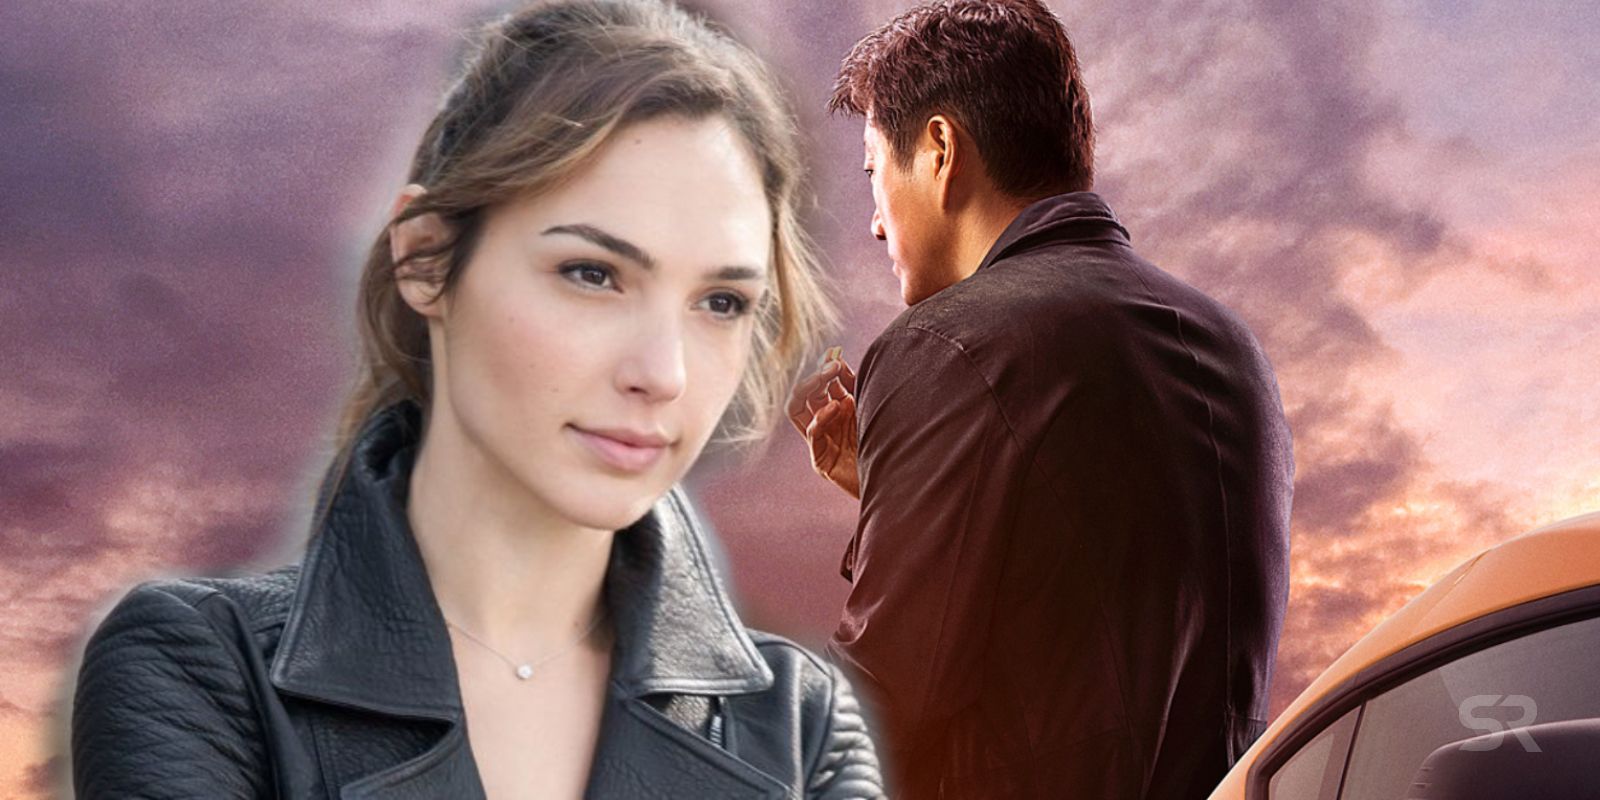 Fast Furious Theory Gal Gadot S Gisele Returns In F9 Gal began modeling in the late 2000s, and made her film debut in the fourth film of the fast and furious. fast furious theory gal gadot s